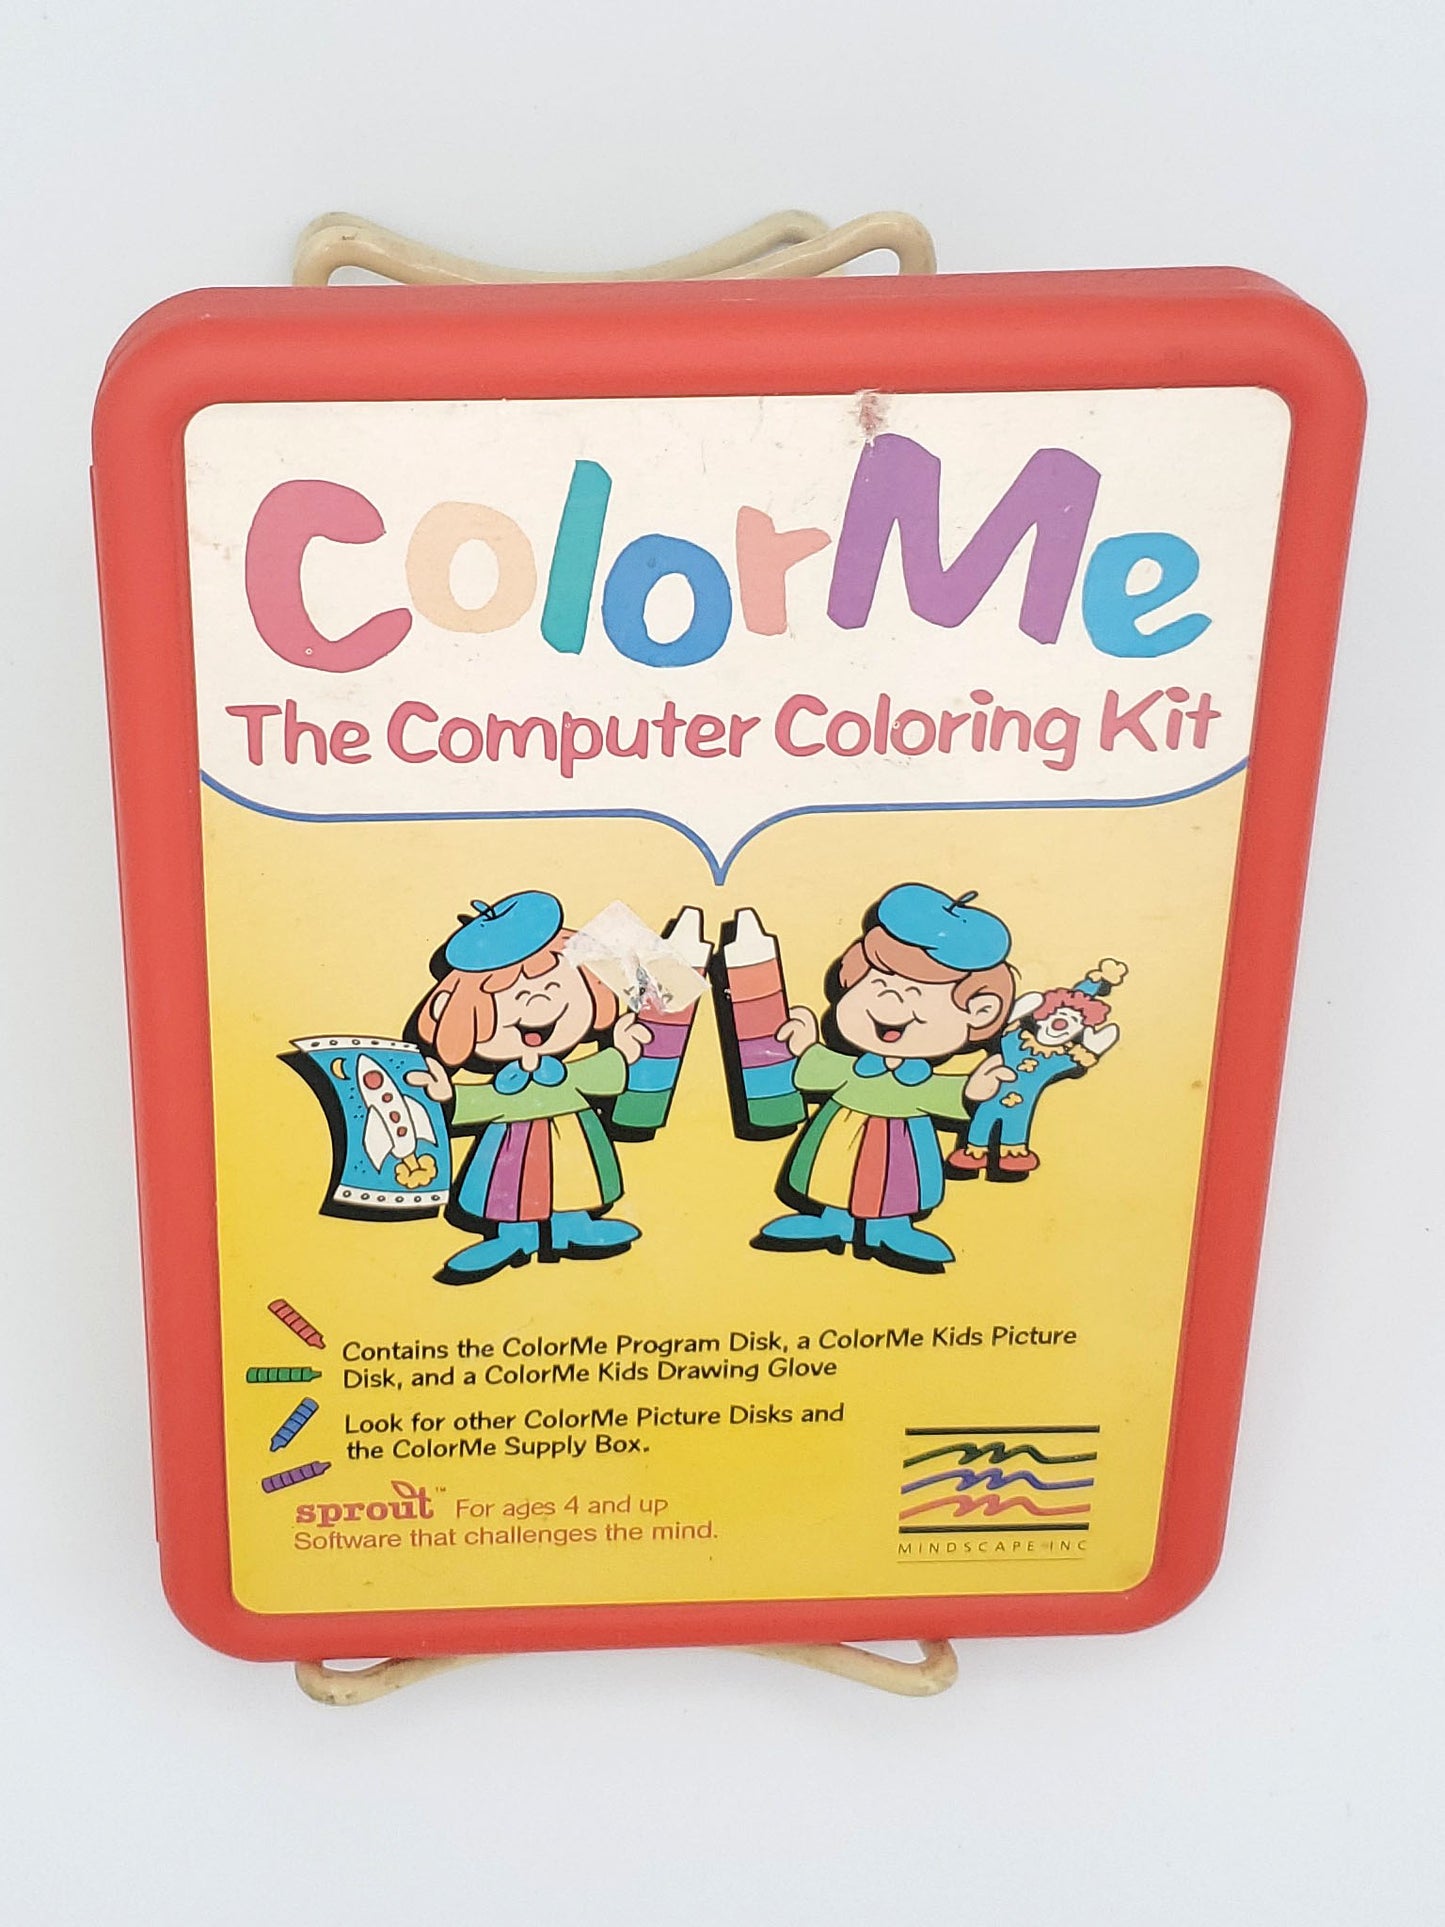 ColorMe - The Computer Coloring Kit from Mindscape